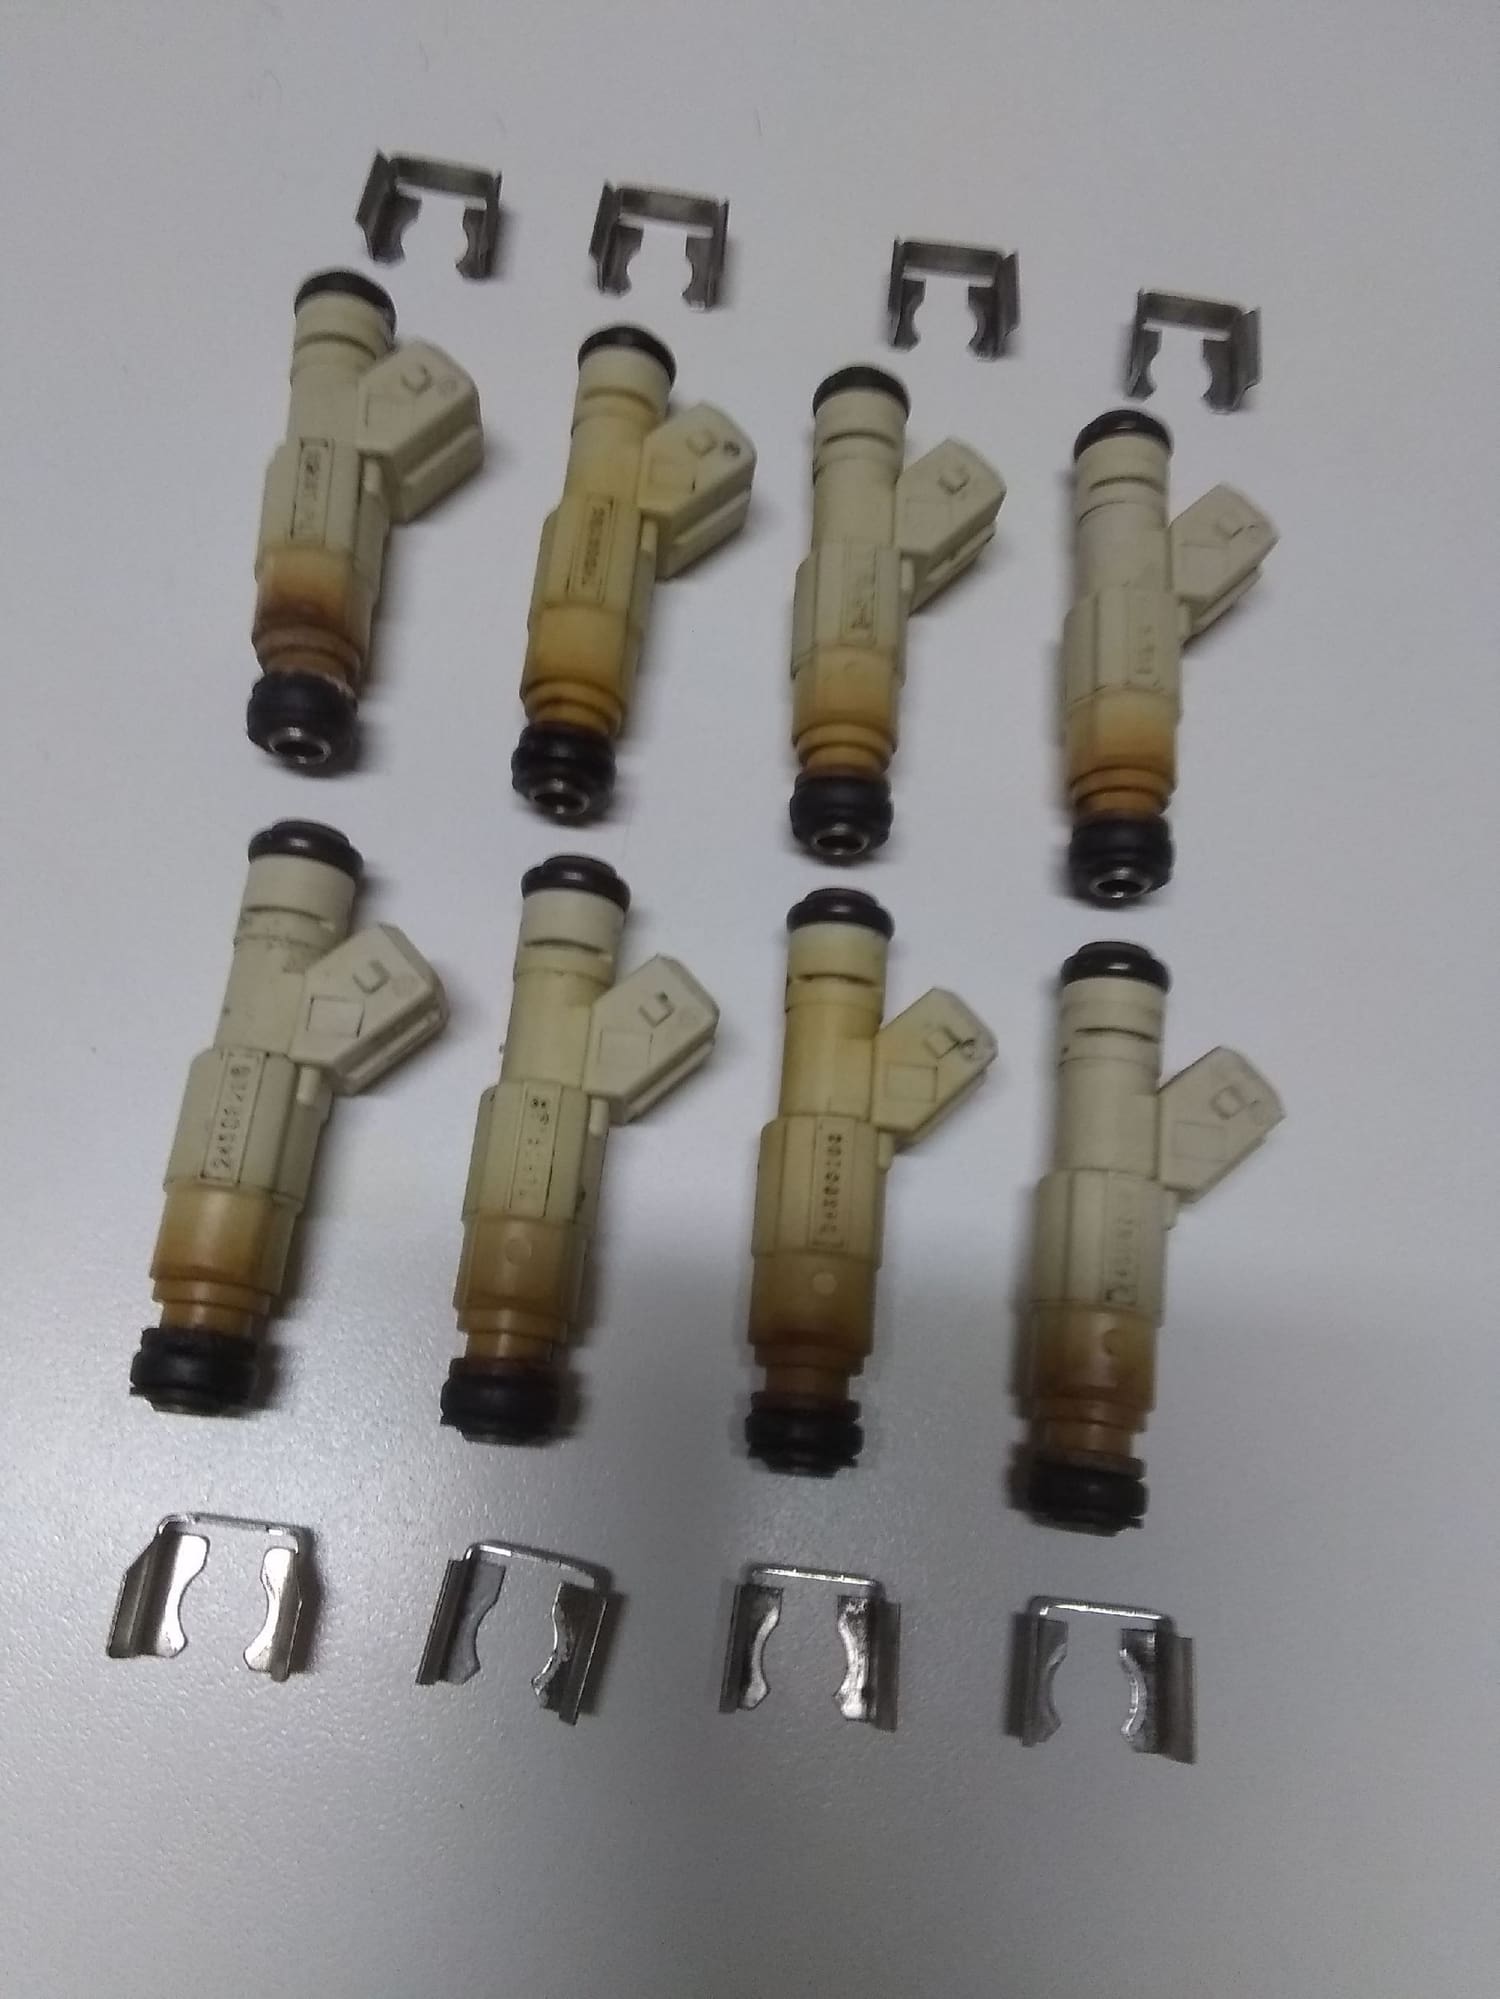  - WTS: Bosch White 36 lb. Injectors with LS1 Fitment - Austin, TX 78652, United States